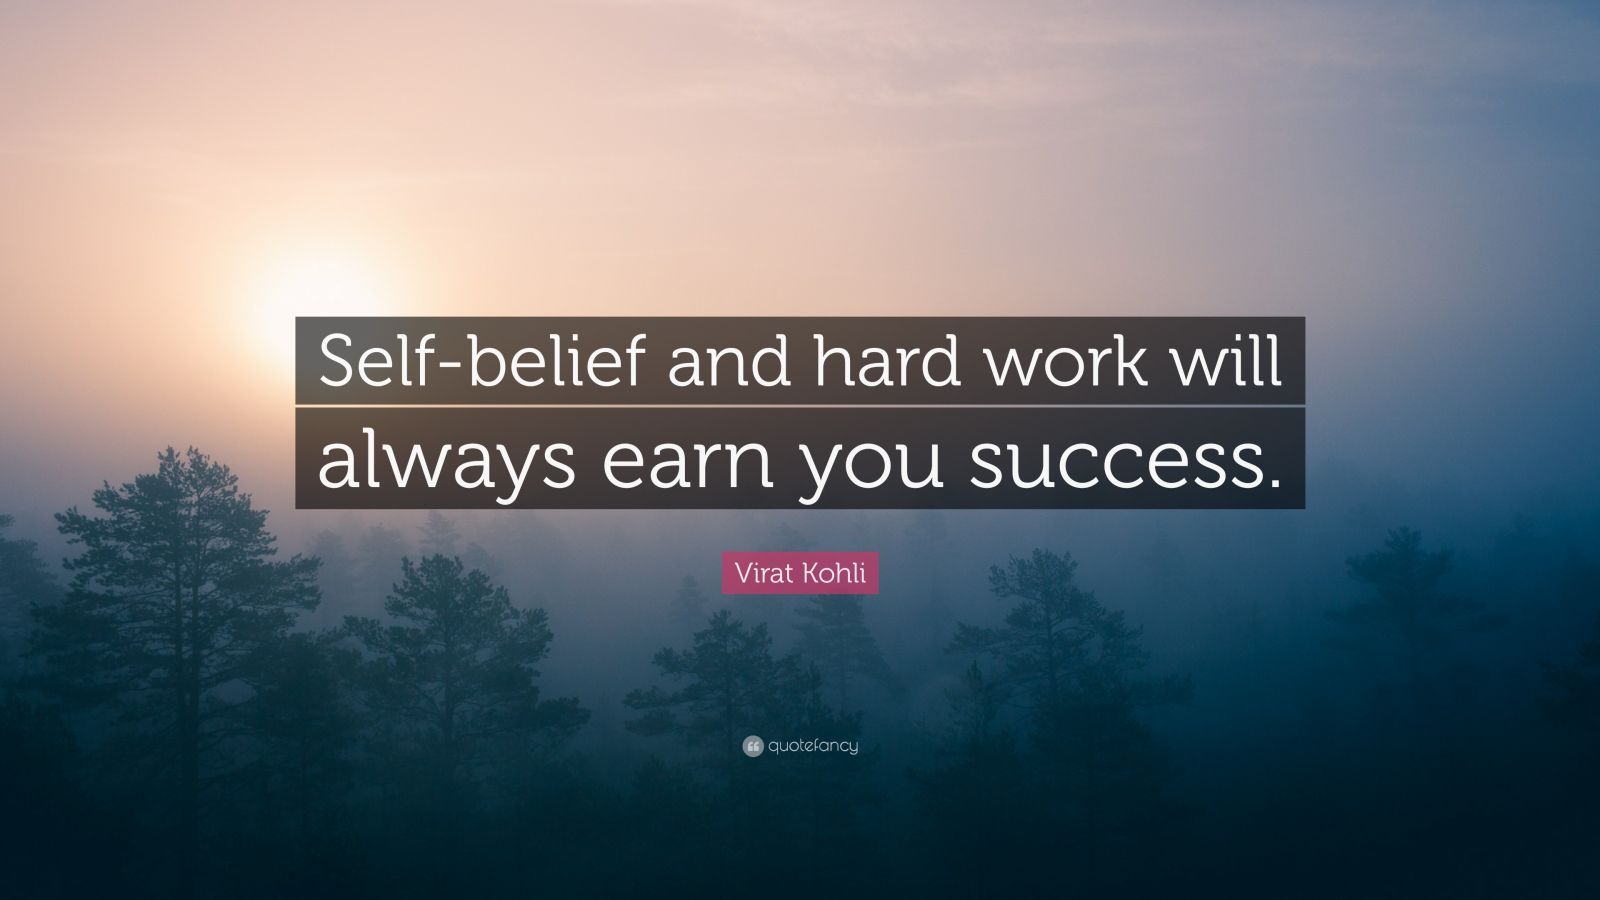 Virat Kohli Quote: “Self-belief and hard work will always earn you ...